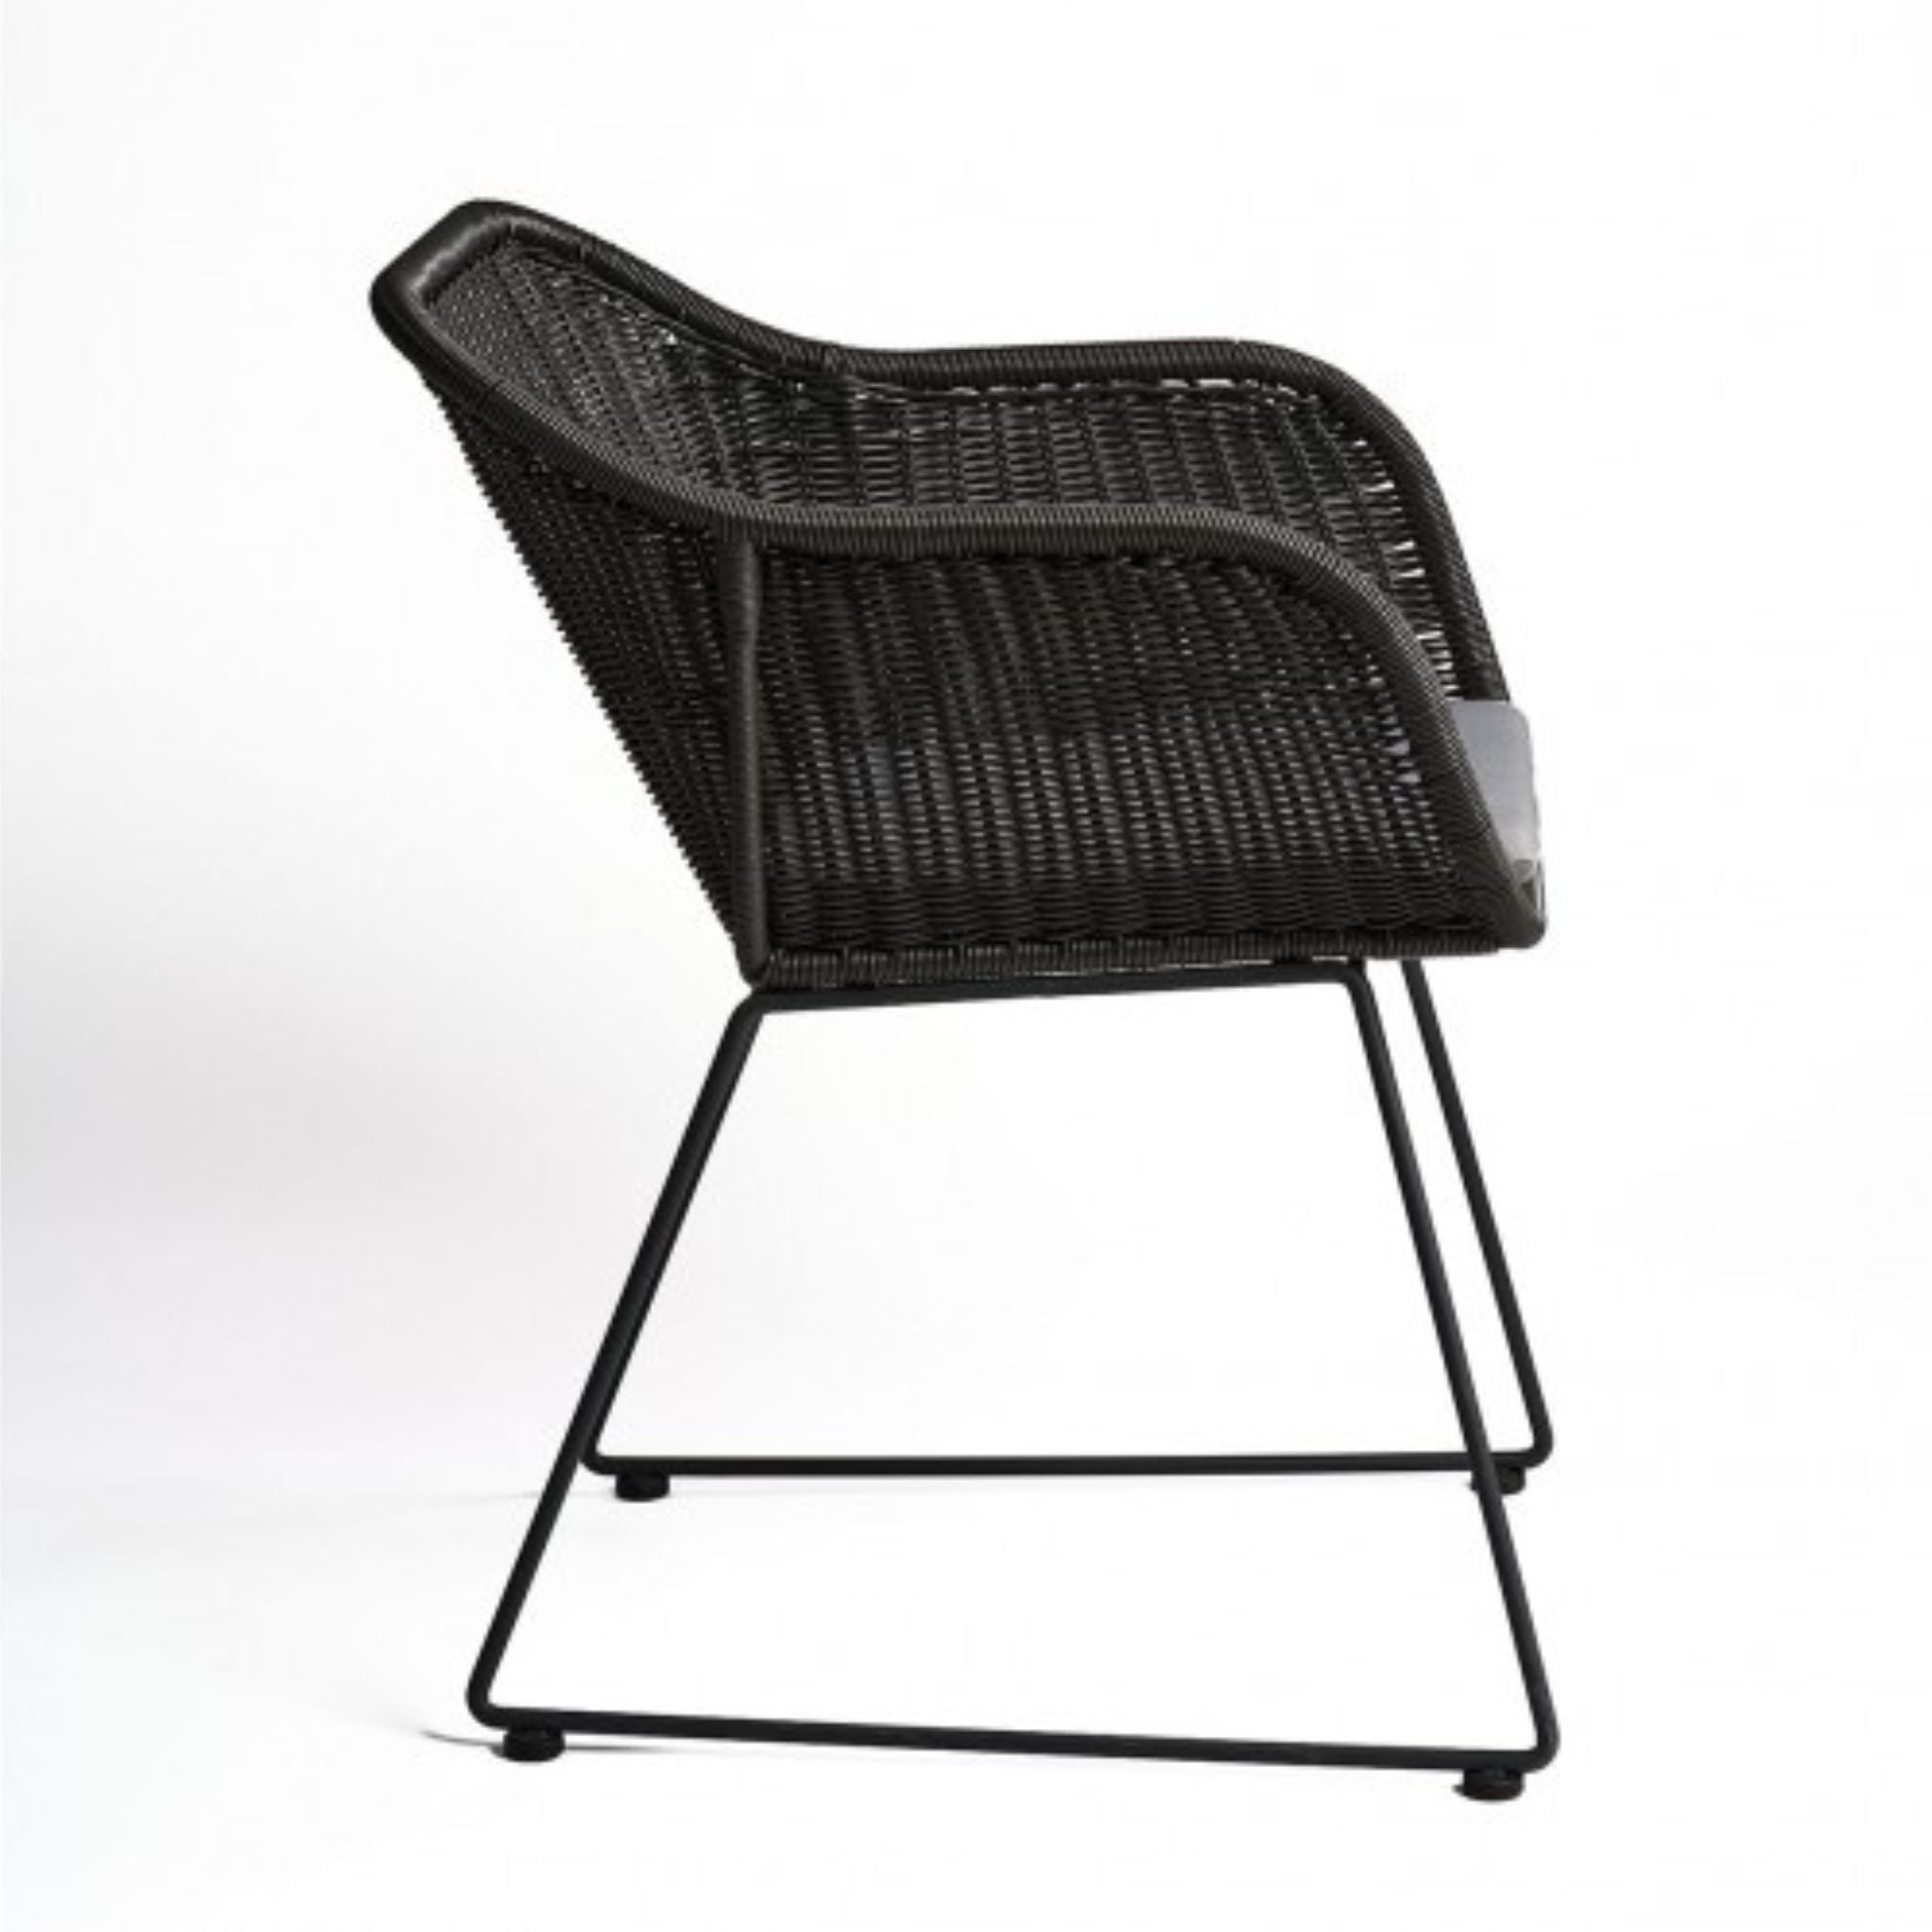 Crisal Decoracion Lucia-1G Armchair Gray Synthetic Rattan and Gray Leg Set of 2 - ModernistaLiving